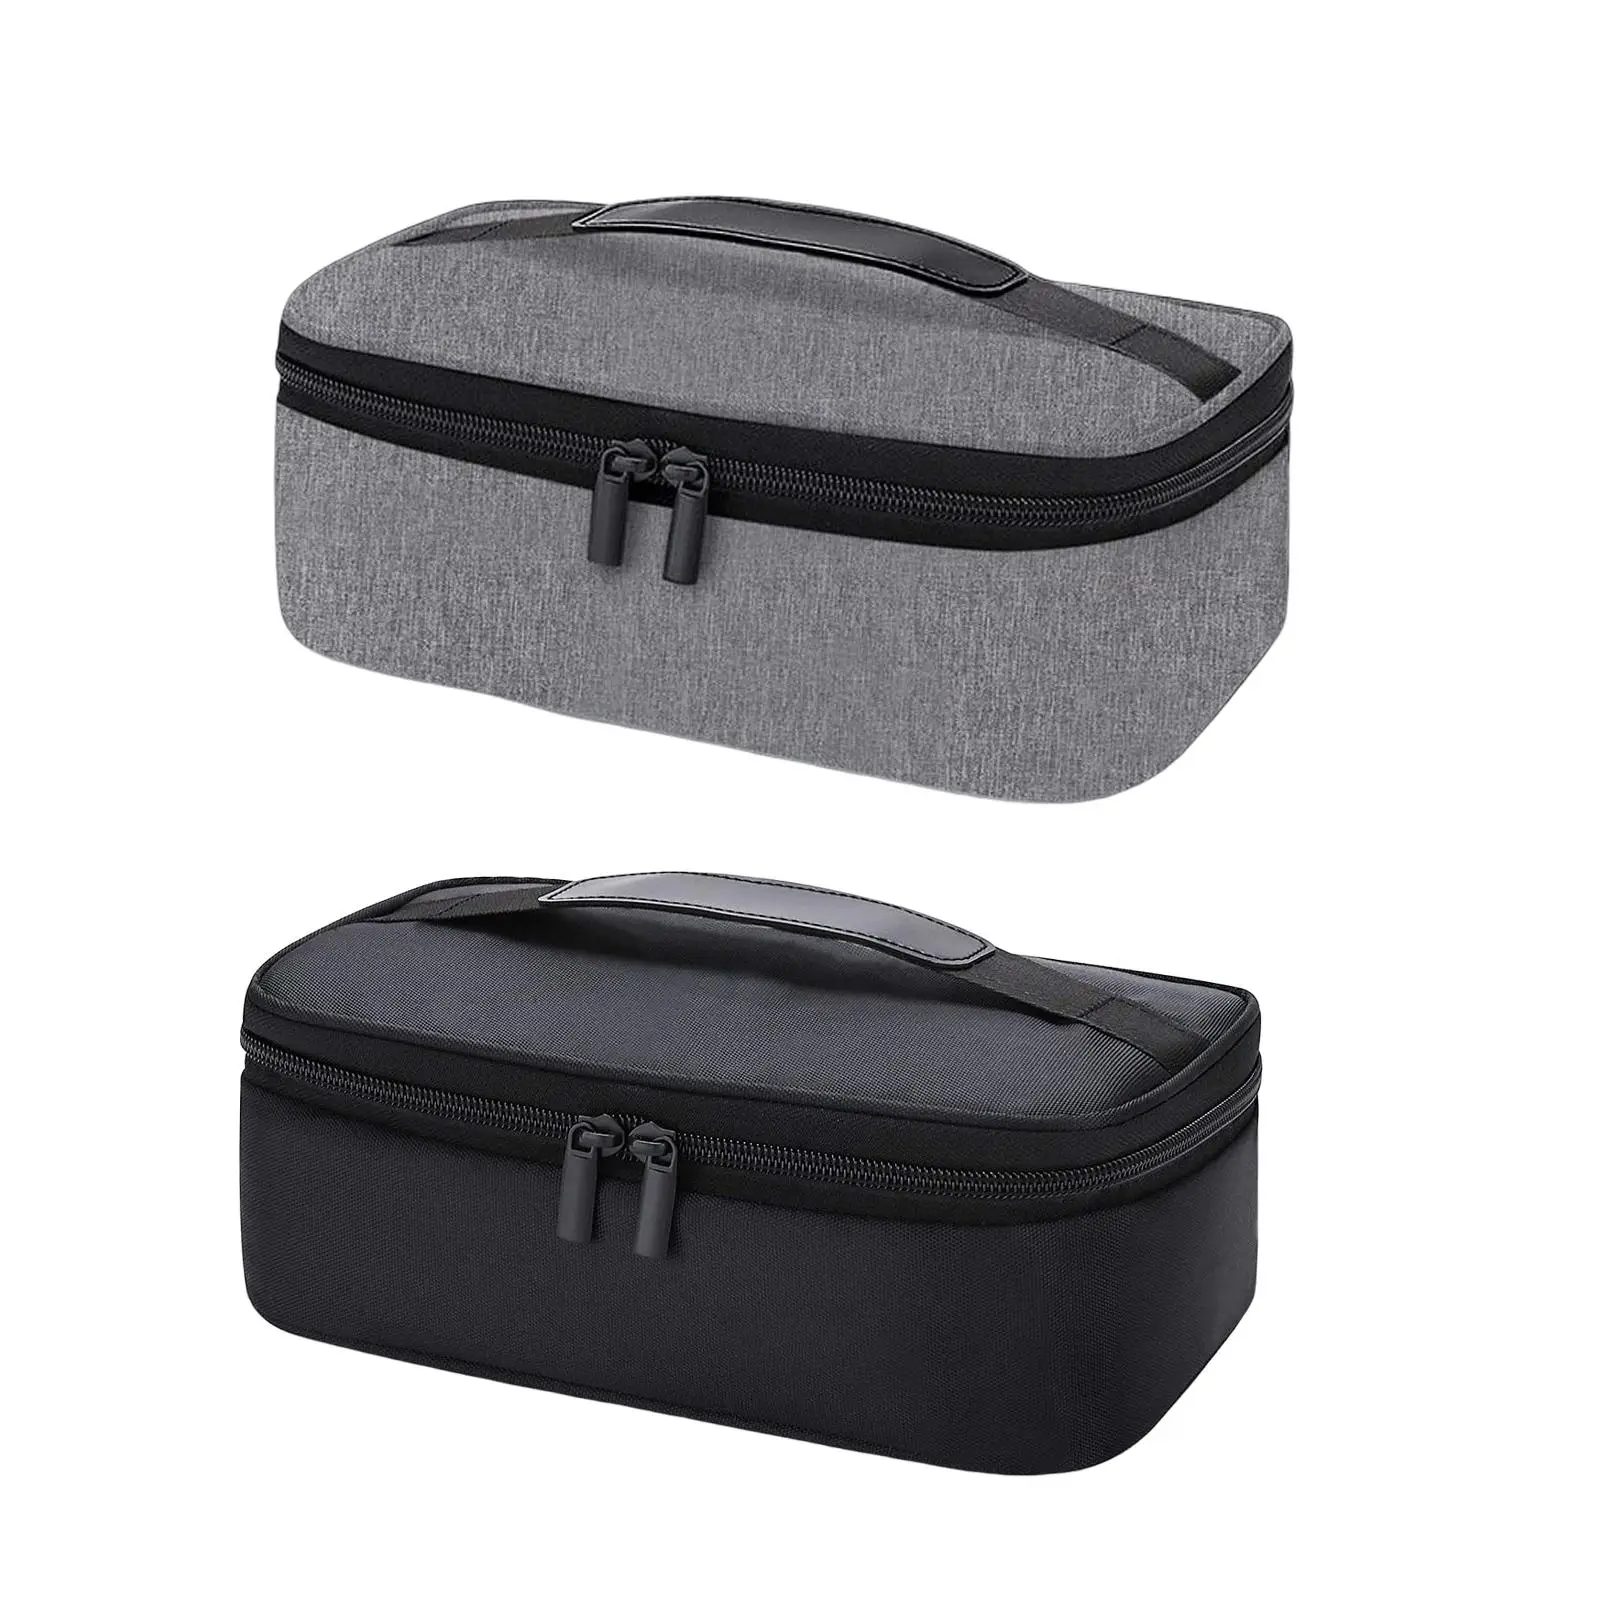 Portable Insulated Lunch Box Waterproof Lining Leakproof Reusable Lunch Cooler Tote for Office Picnic Outdoor Work Adults